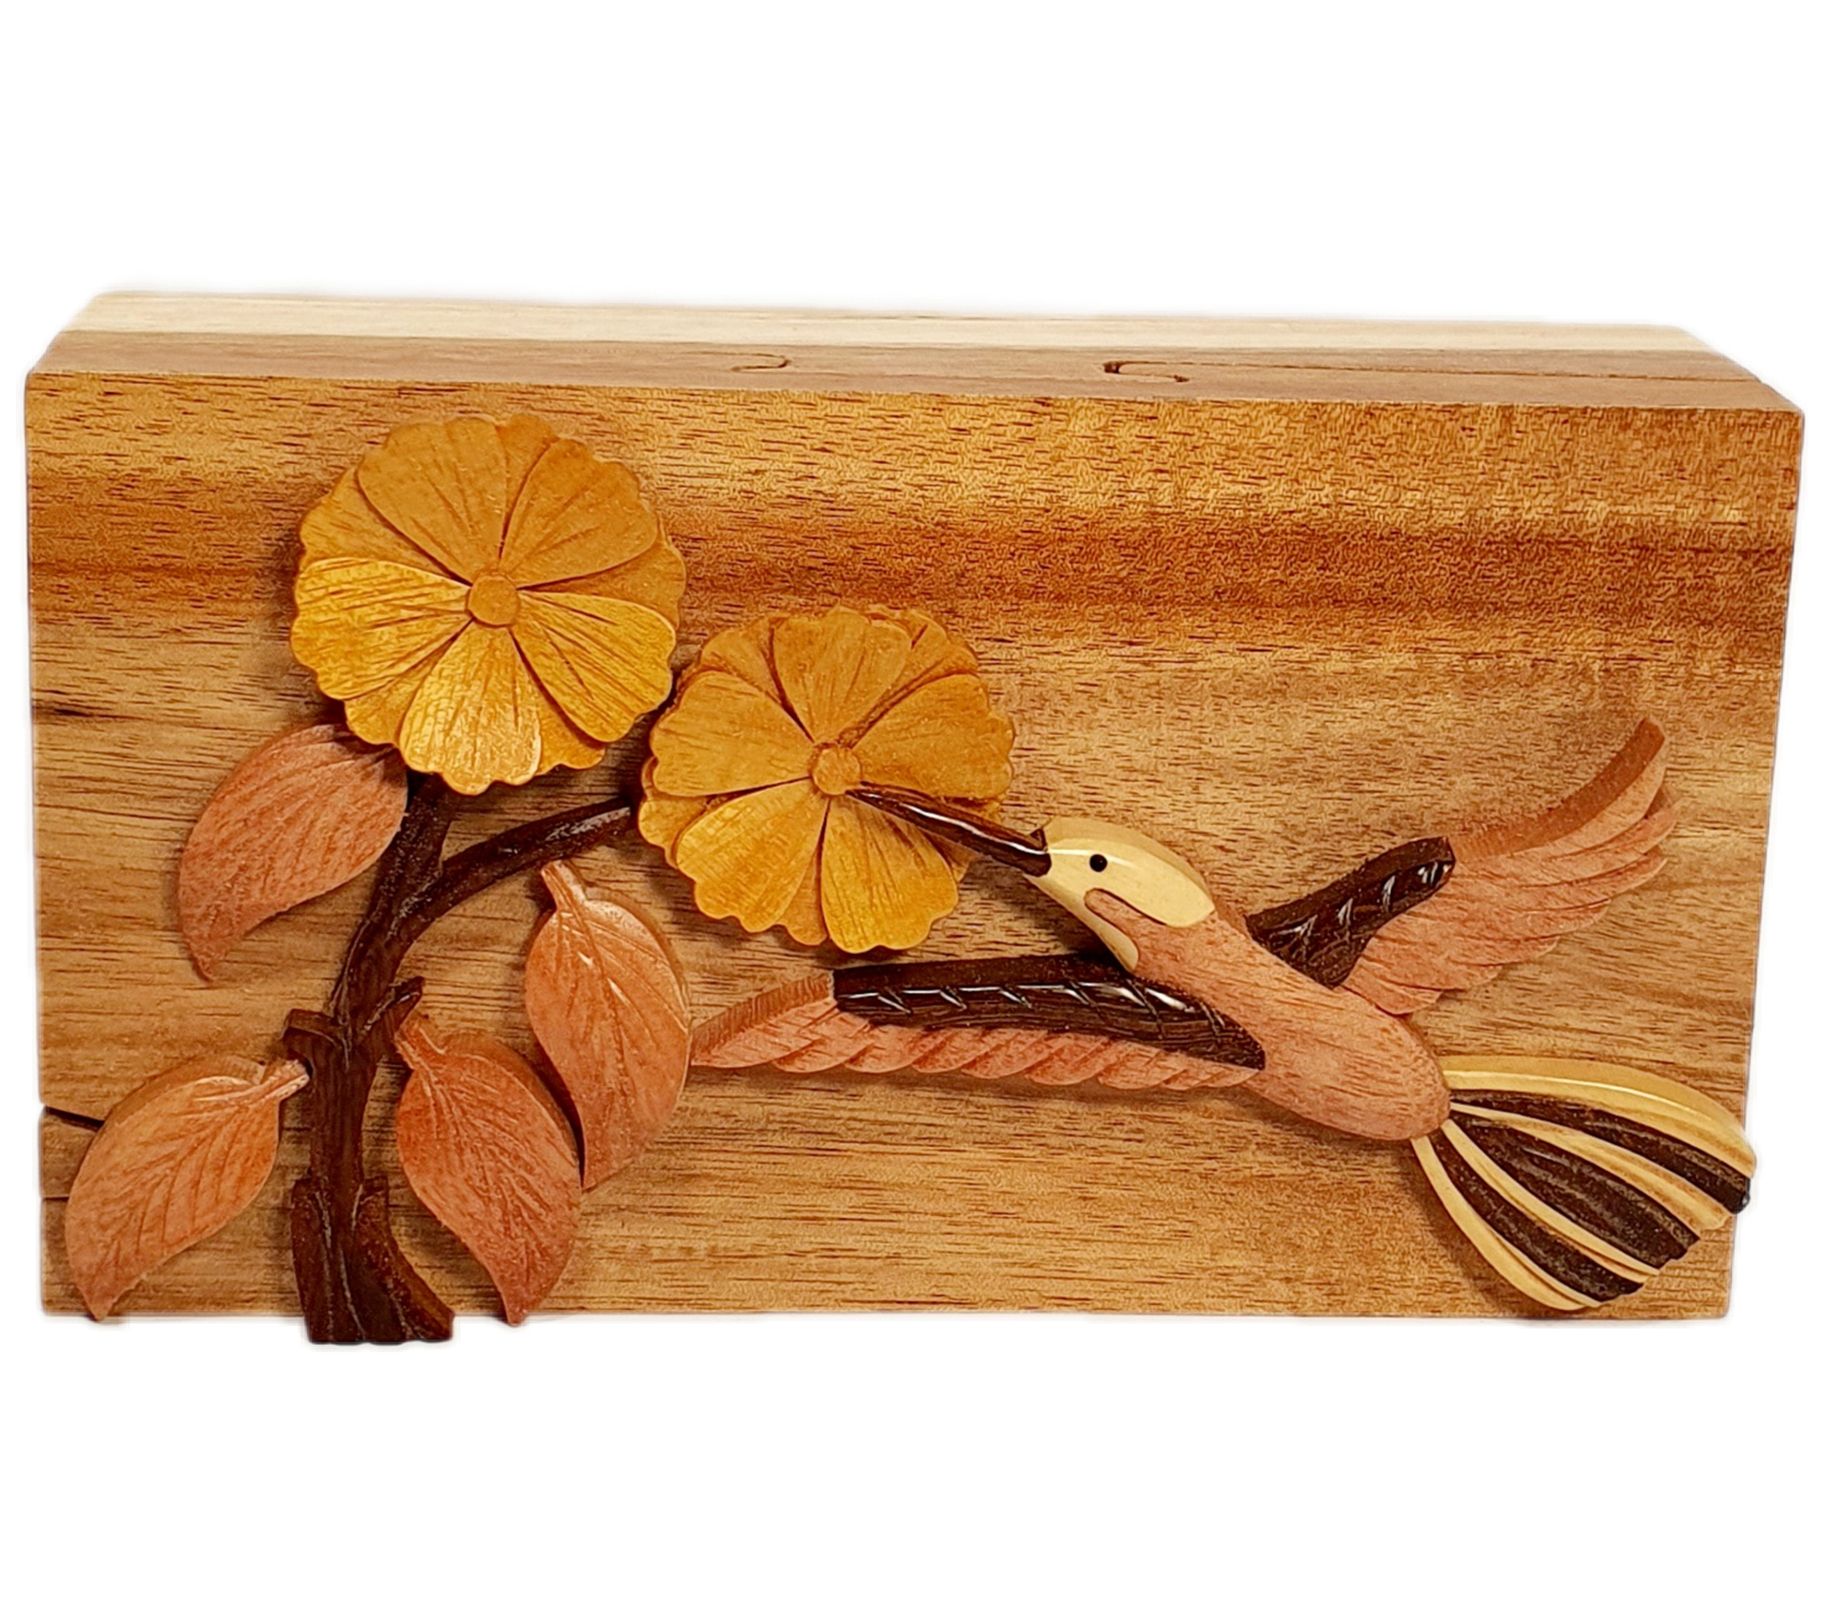 Carver Dan's Fish for Dinner Puzzle Box with Magnet Closures 